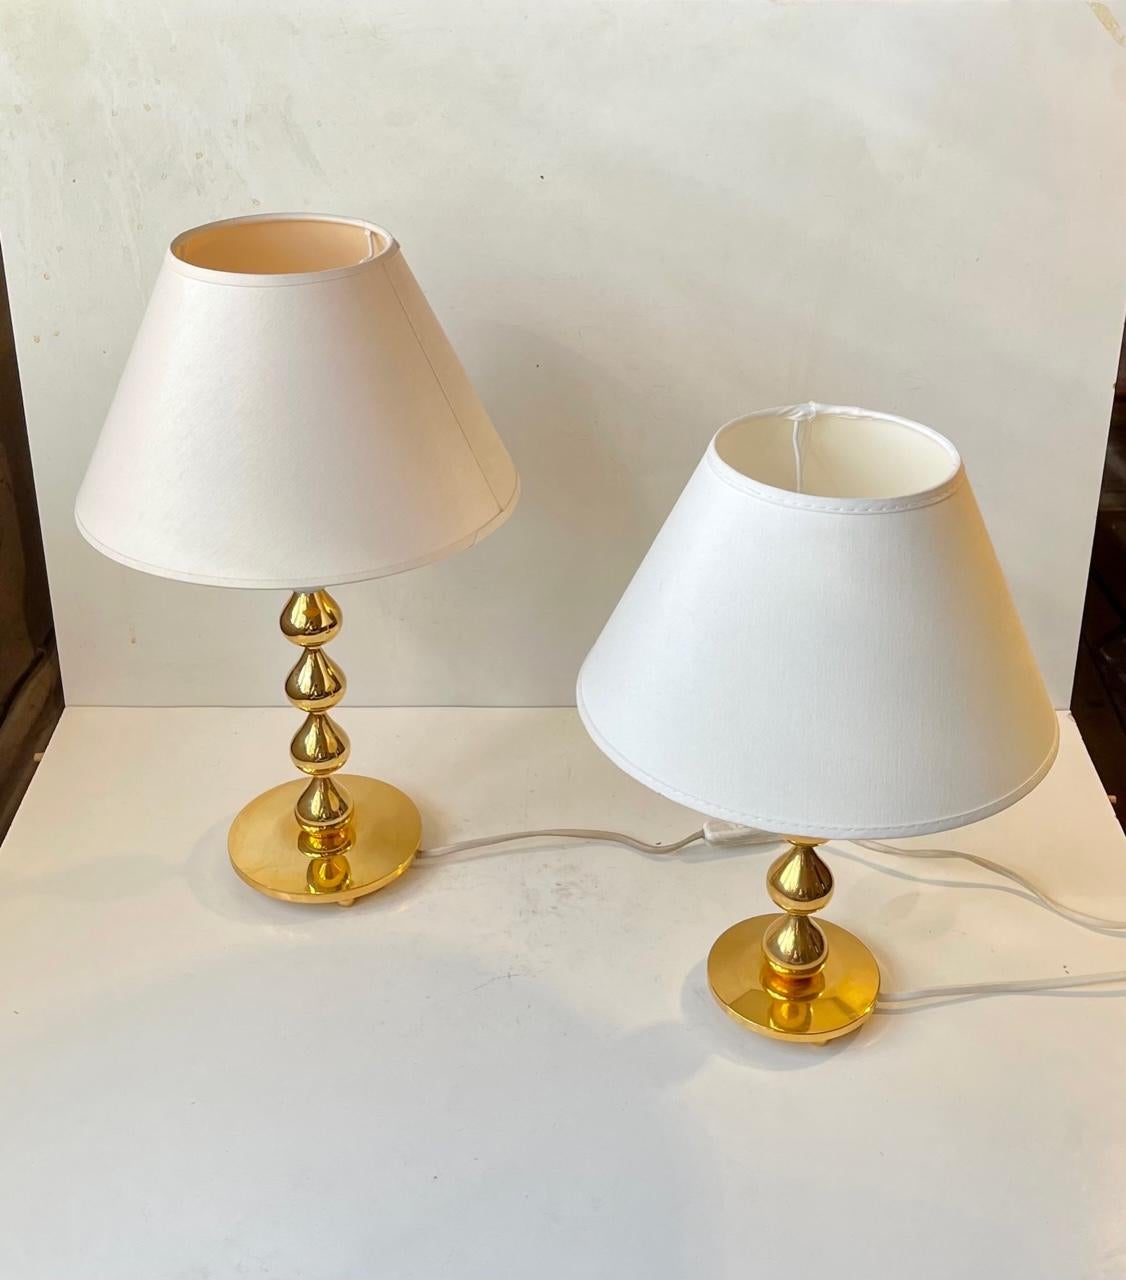 Sculptural tear drop shaped set of 24-carat gold plated Table lights designed by Hugo Asmussen for Asmussen in Denmark, circa 1960-70. Very heavy made stock in a superb quality. They come with matching white textile shades. Measurements: H: 35/45